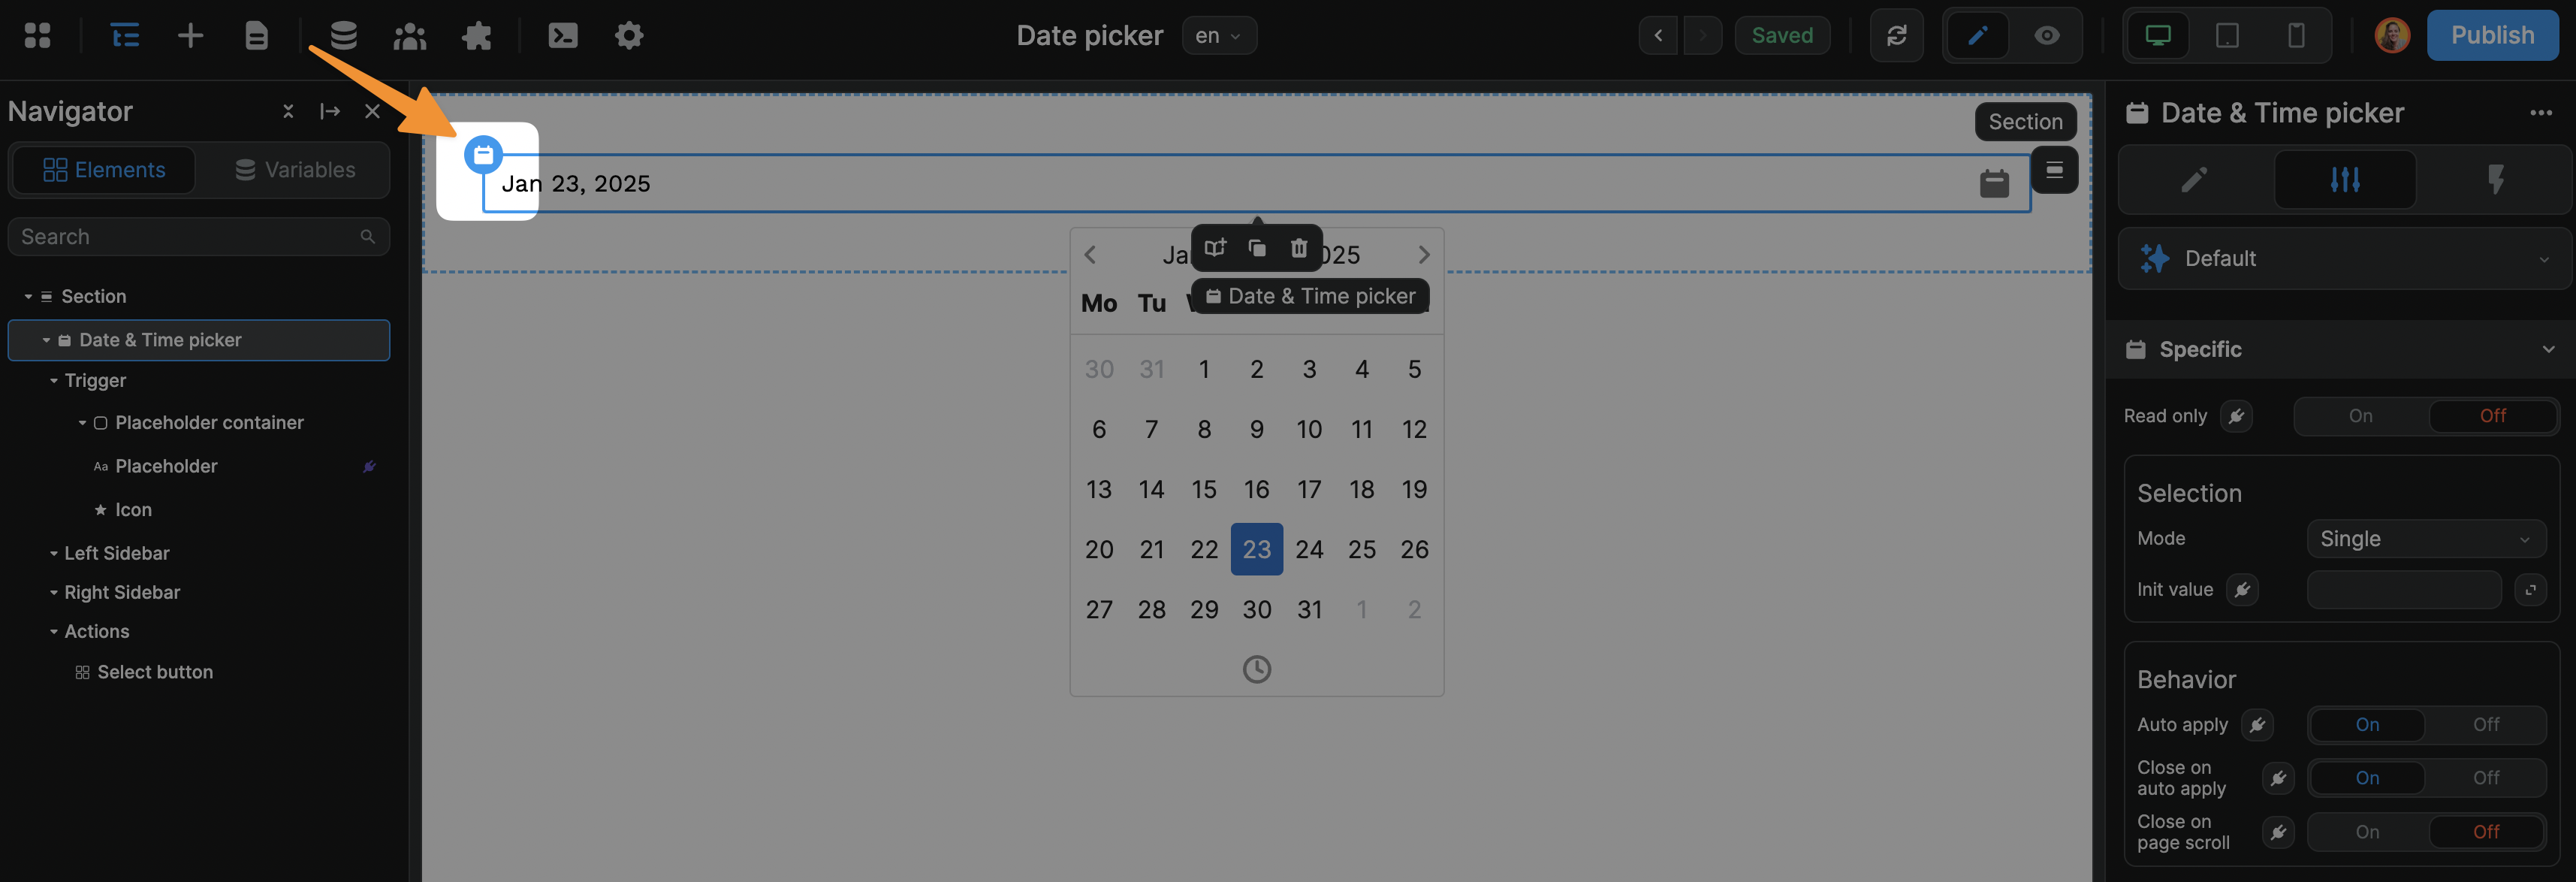 Date picker selection tip